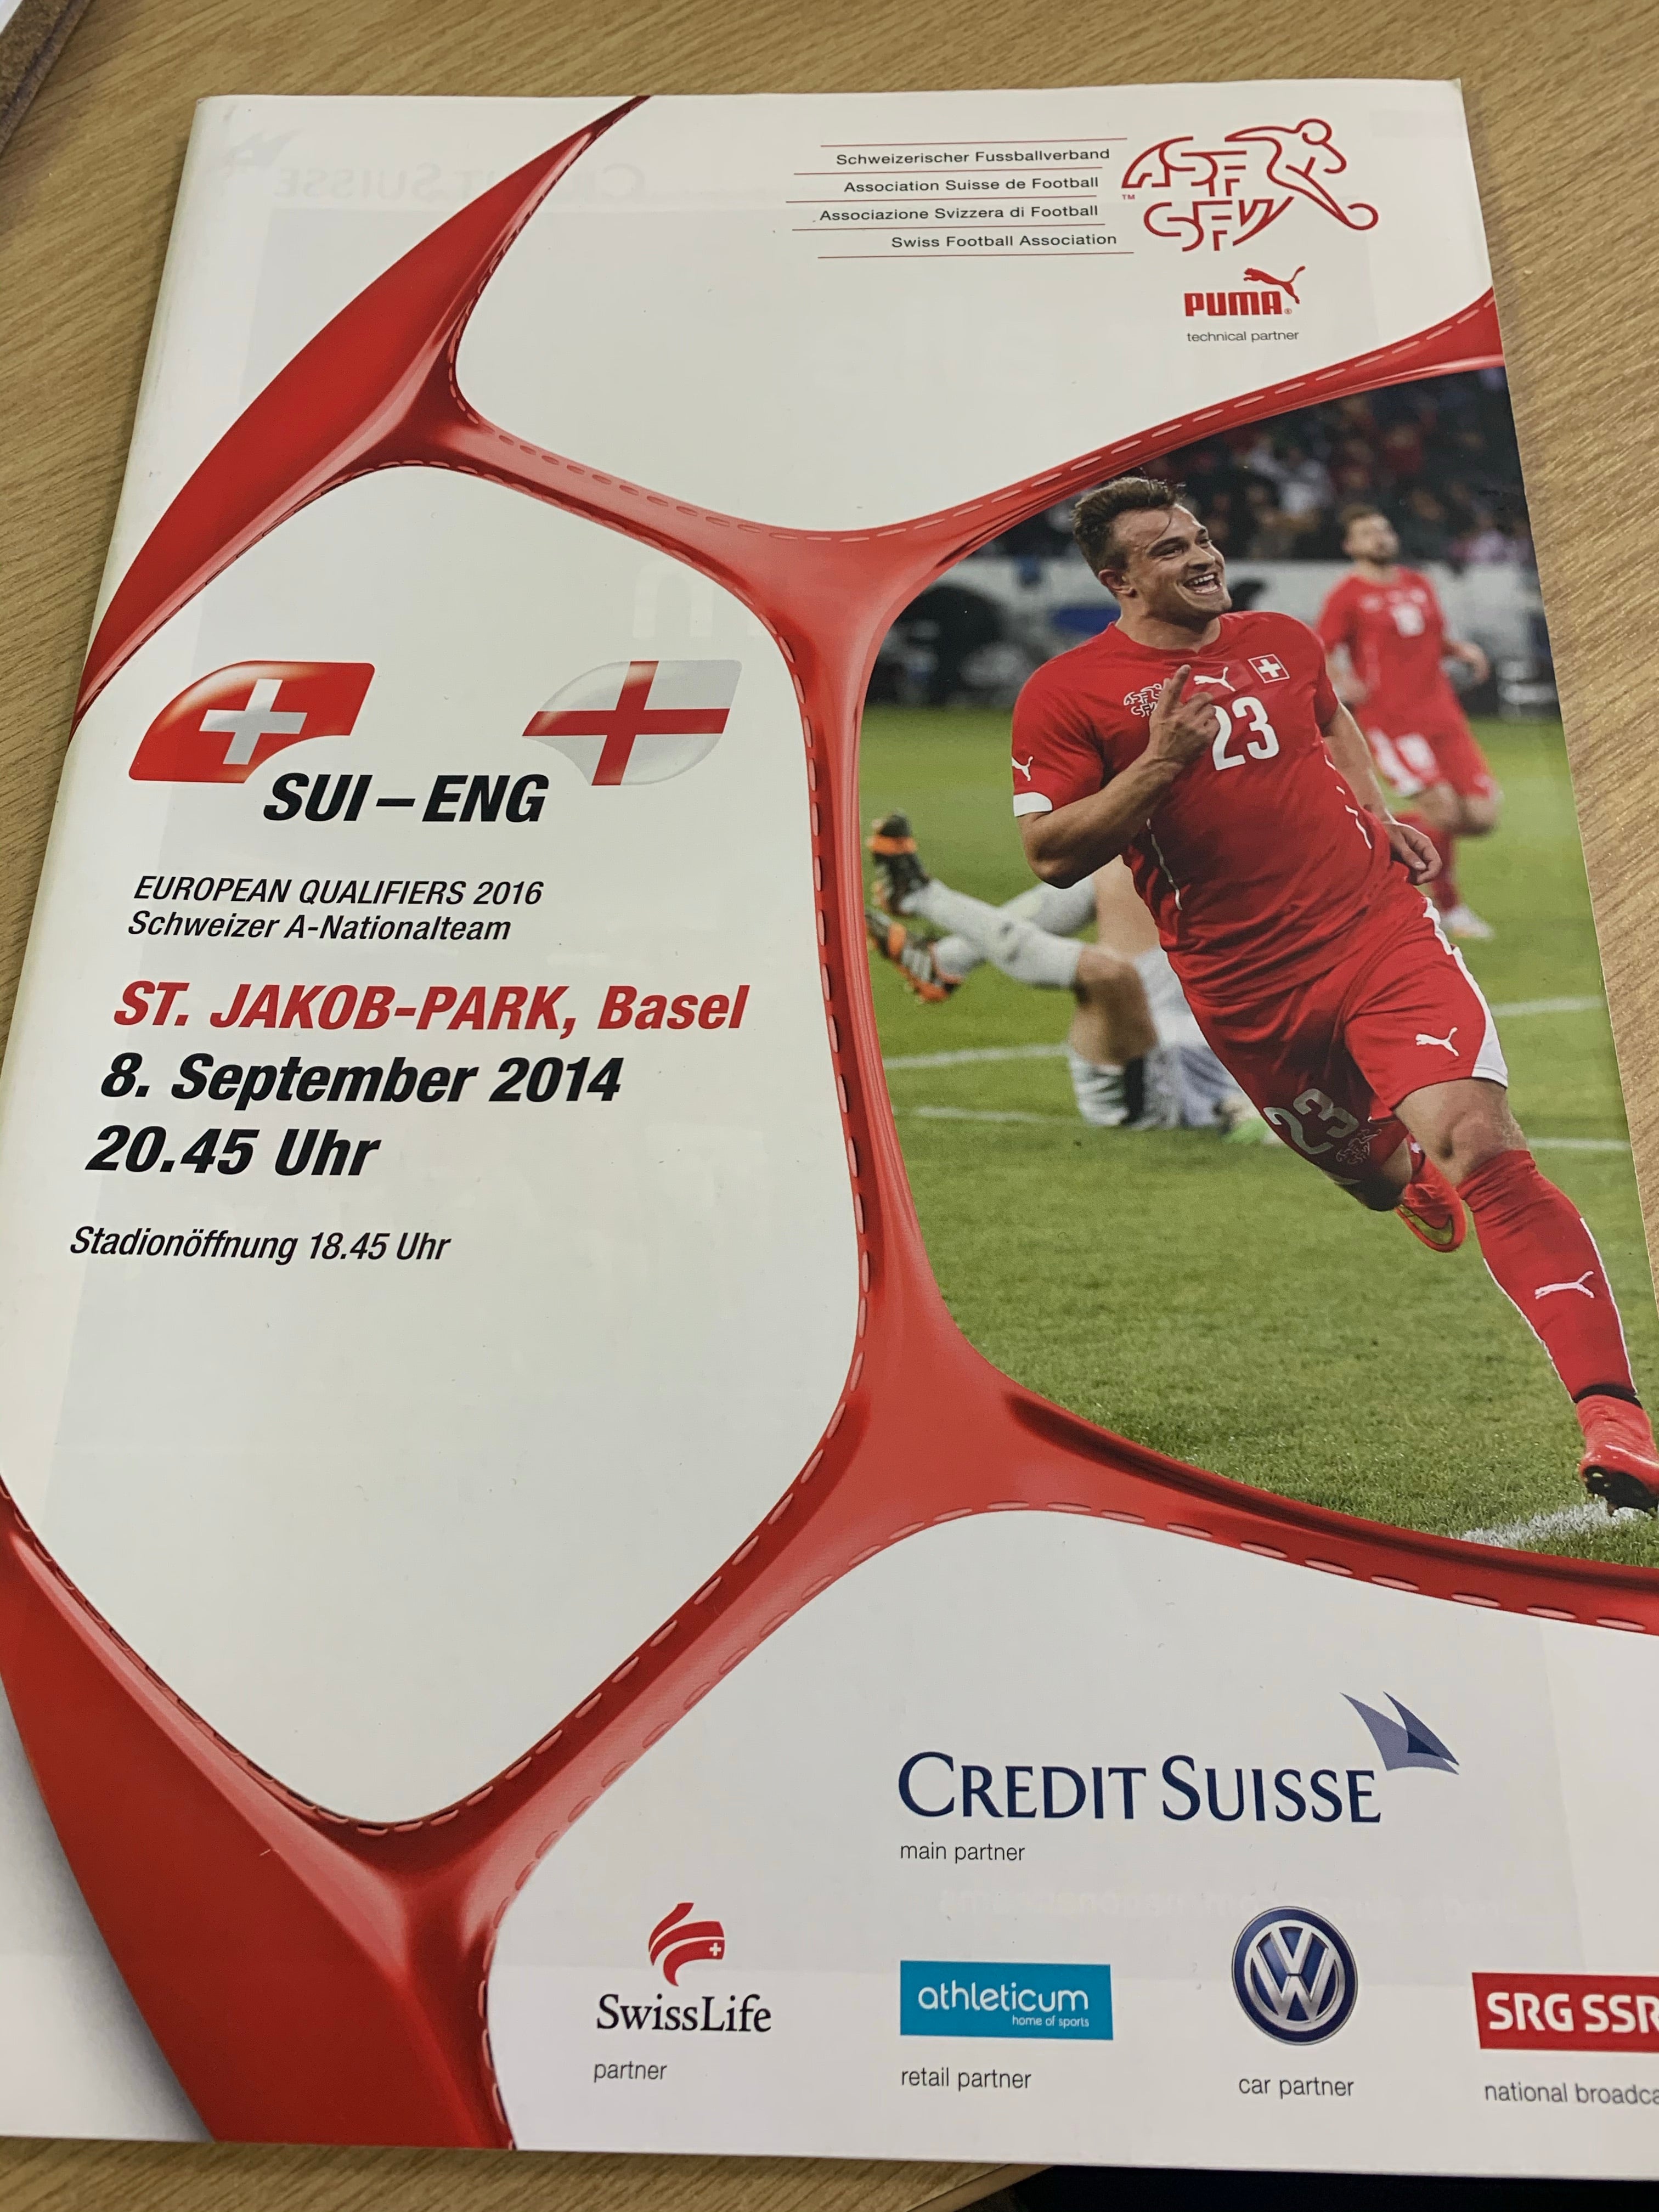 Switzerland v England 08/09/14 Programme and Official Schedule